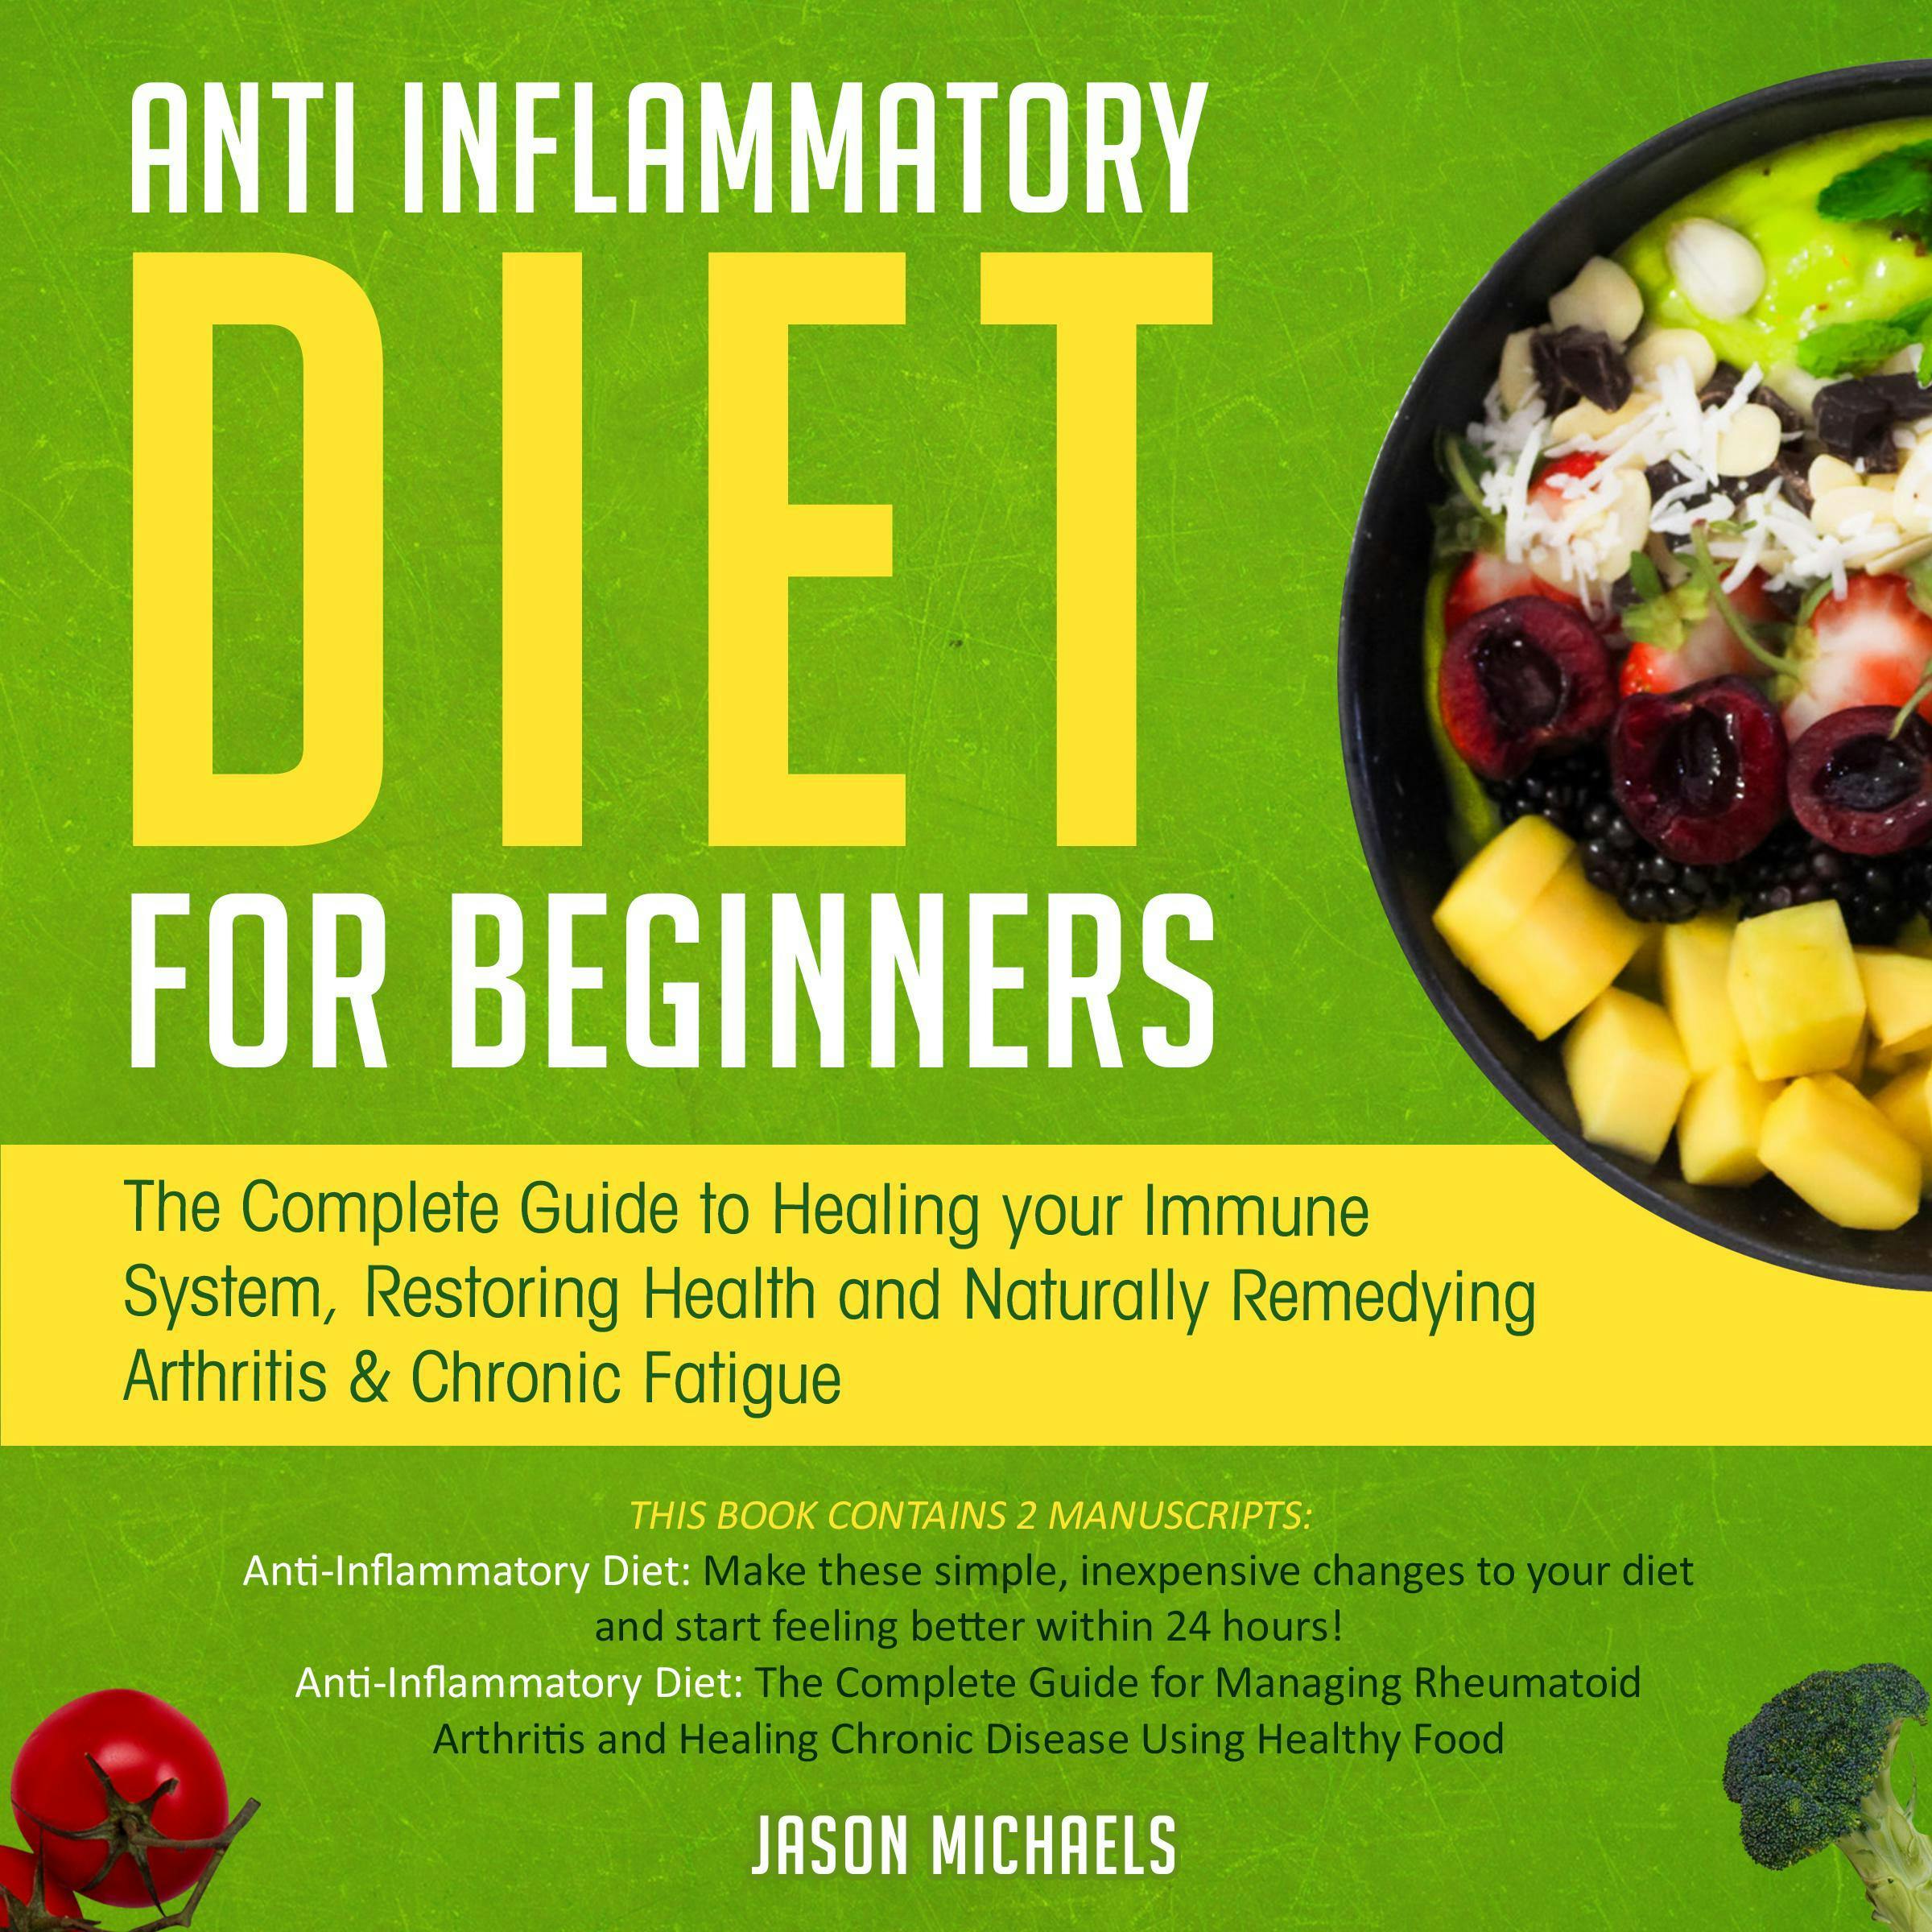 Anti-Inflammatory Diet For Beginners: The Complete Guide to Healing Your Immune System, Restoring Health and Naturally Remedying Arthritis & Chronic Fatigue - Jason Michaels